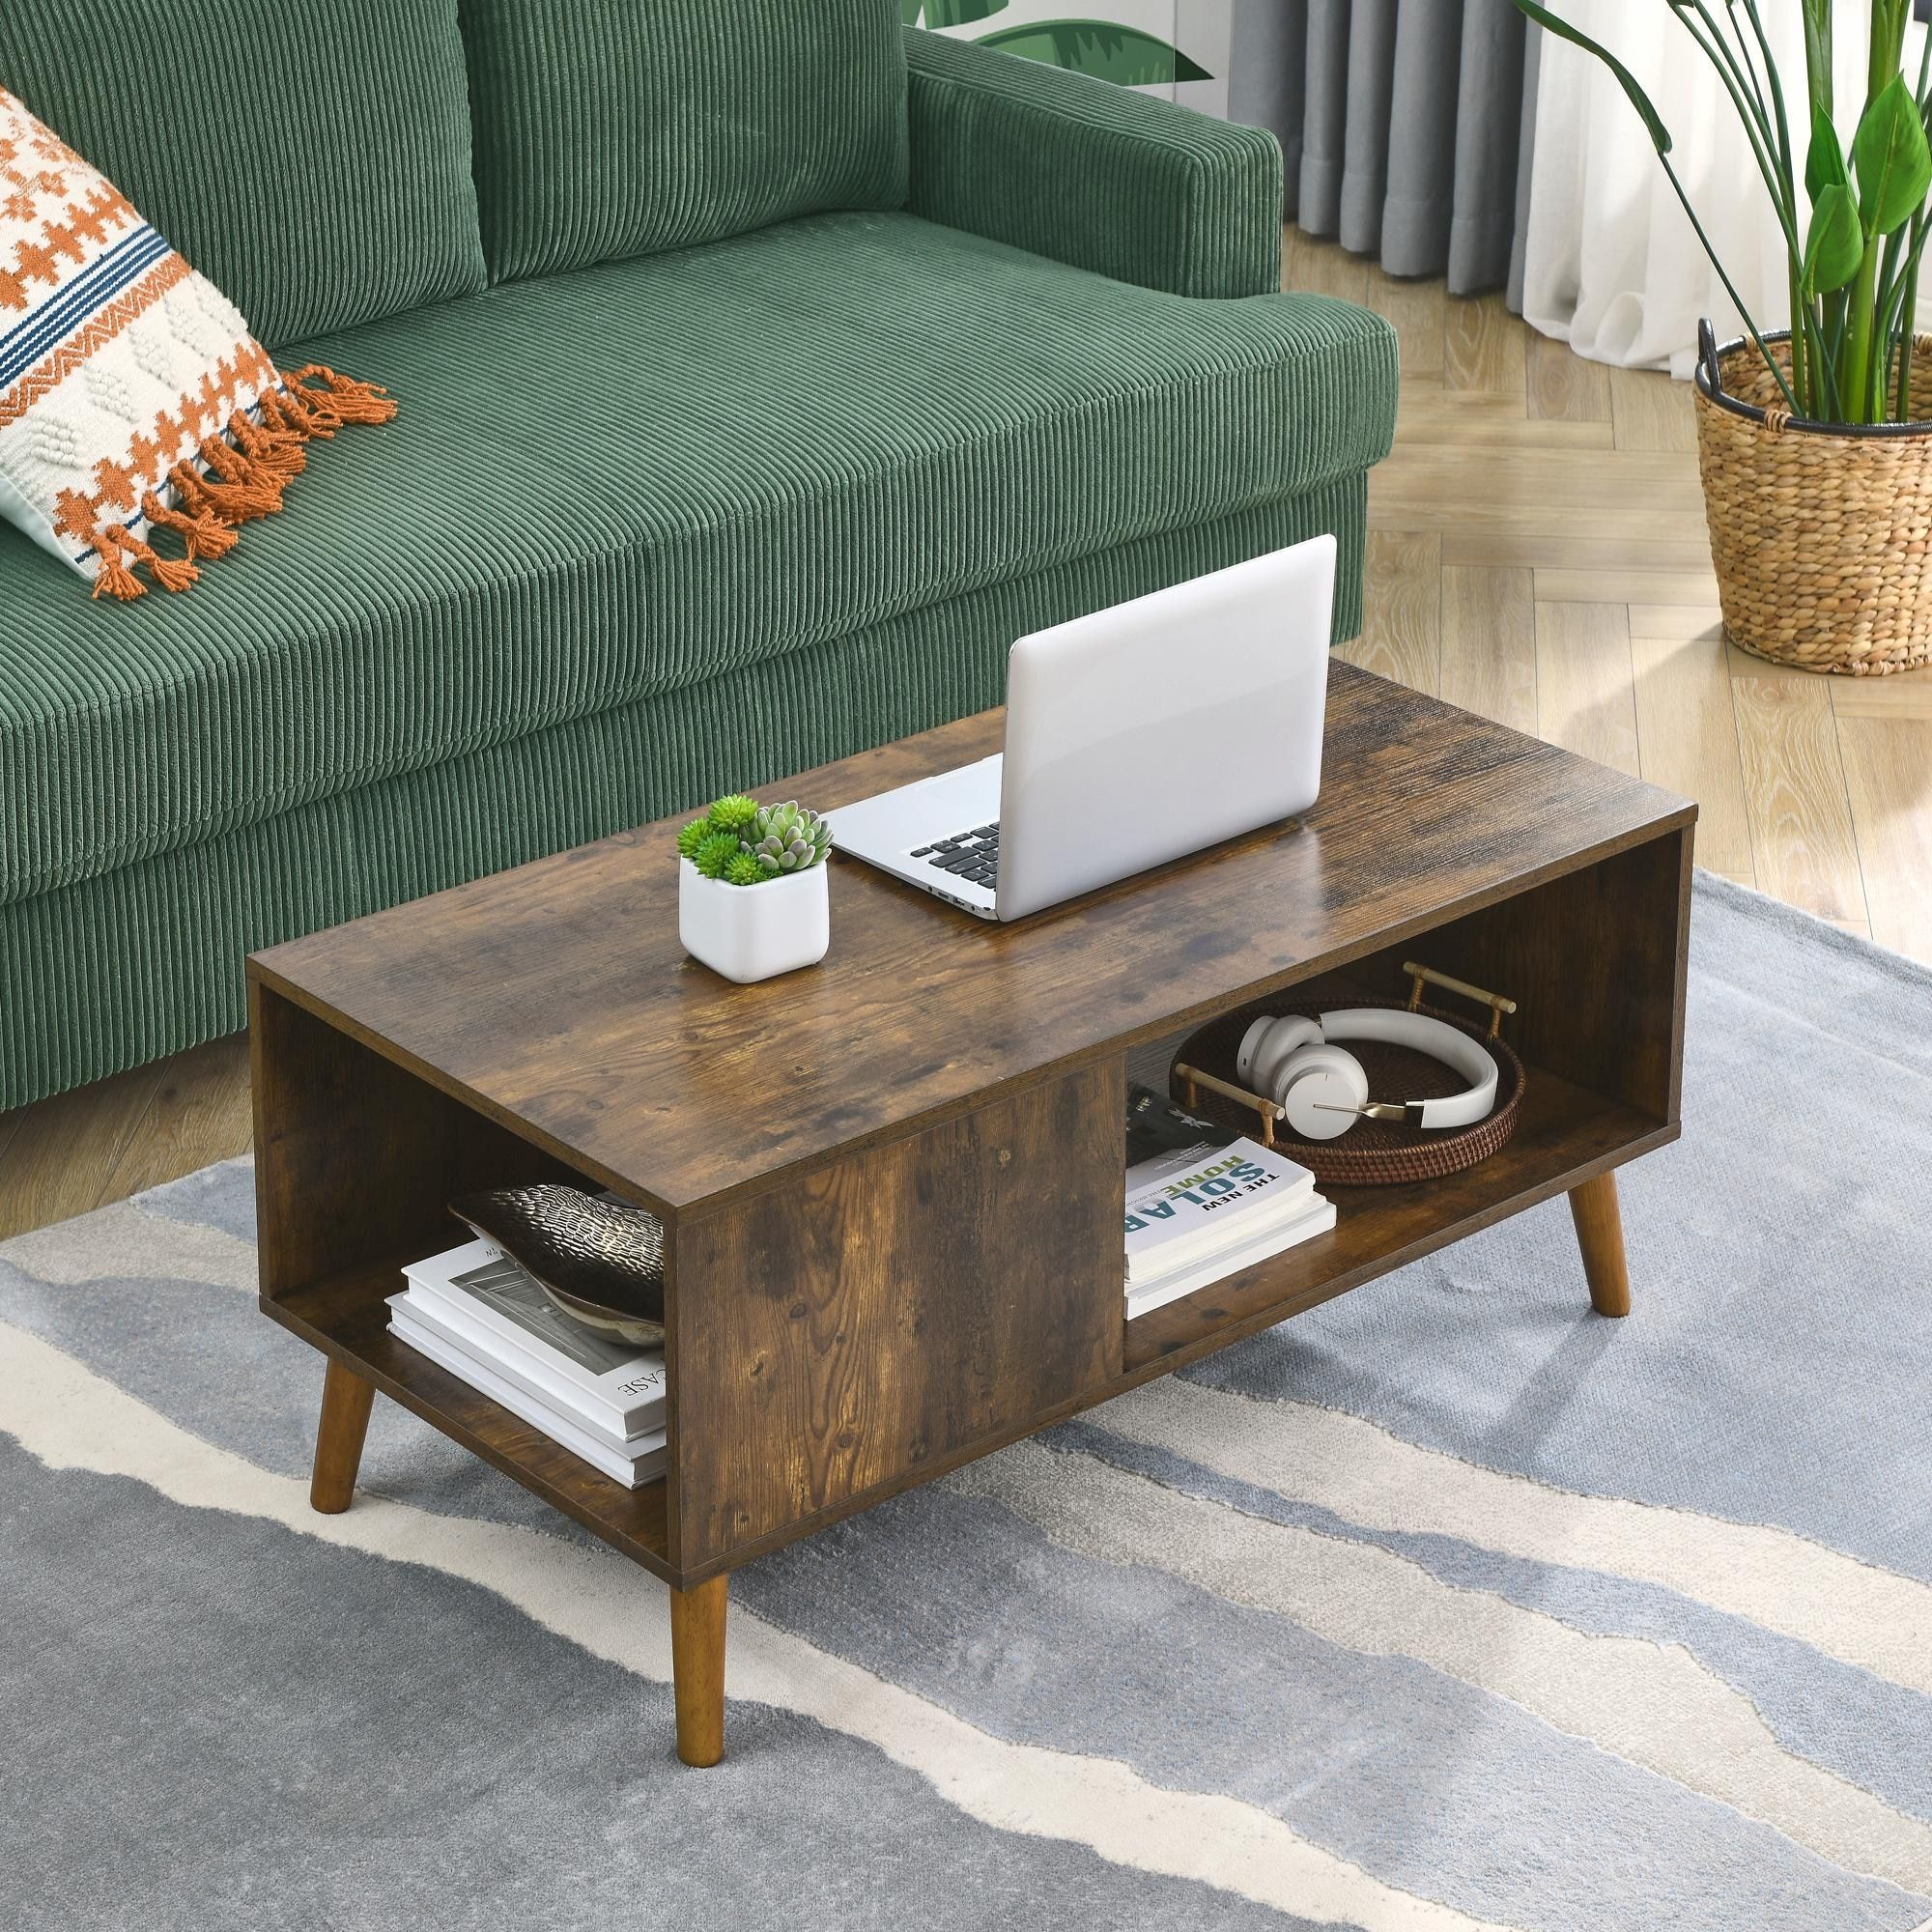 Stylish Coffee Table With Open Storage Shelf For Living Room Decor – On  Sale – Bed Bath & Beyond – 38423210 Inside Coffee Tables With Open Storage Shelves (View 10 of 15)